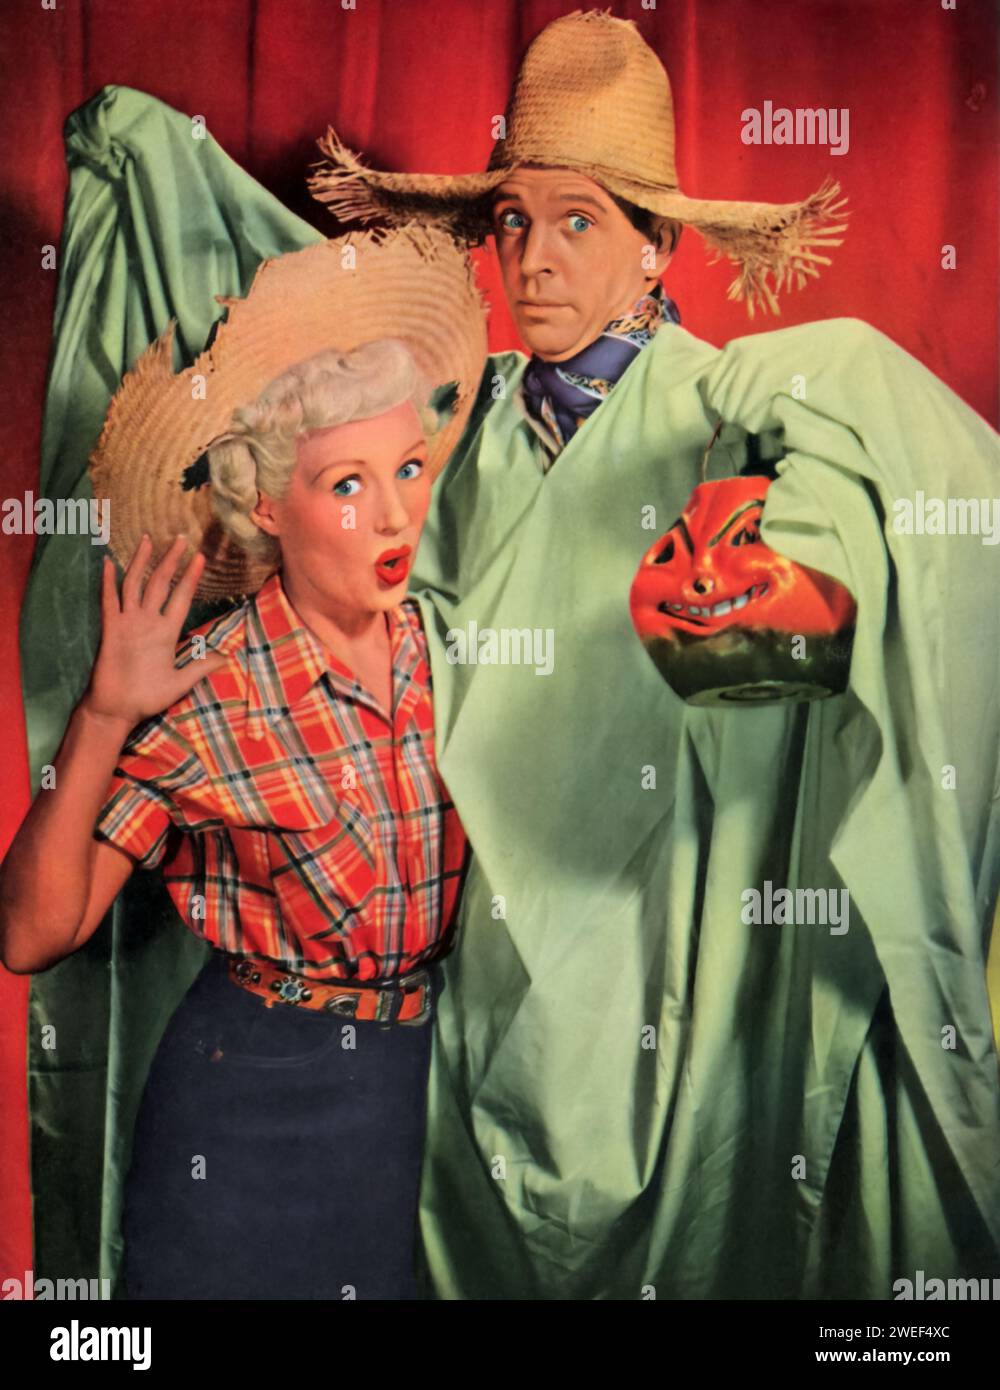 Dan Dailey and Betty Grable star in 'My Blue Heaven' (1950), a vibrant musical film. In this movie, Dailey and Grable play Jack and Kitty Moran, a married couple who are also successful song-and-dance performers. The plot revolves around their journey to adopt a child while balancing their careers in show business. Stock Photo